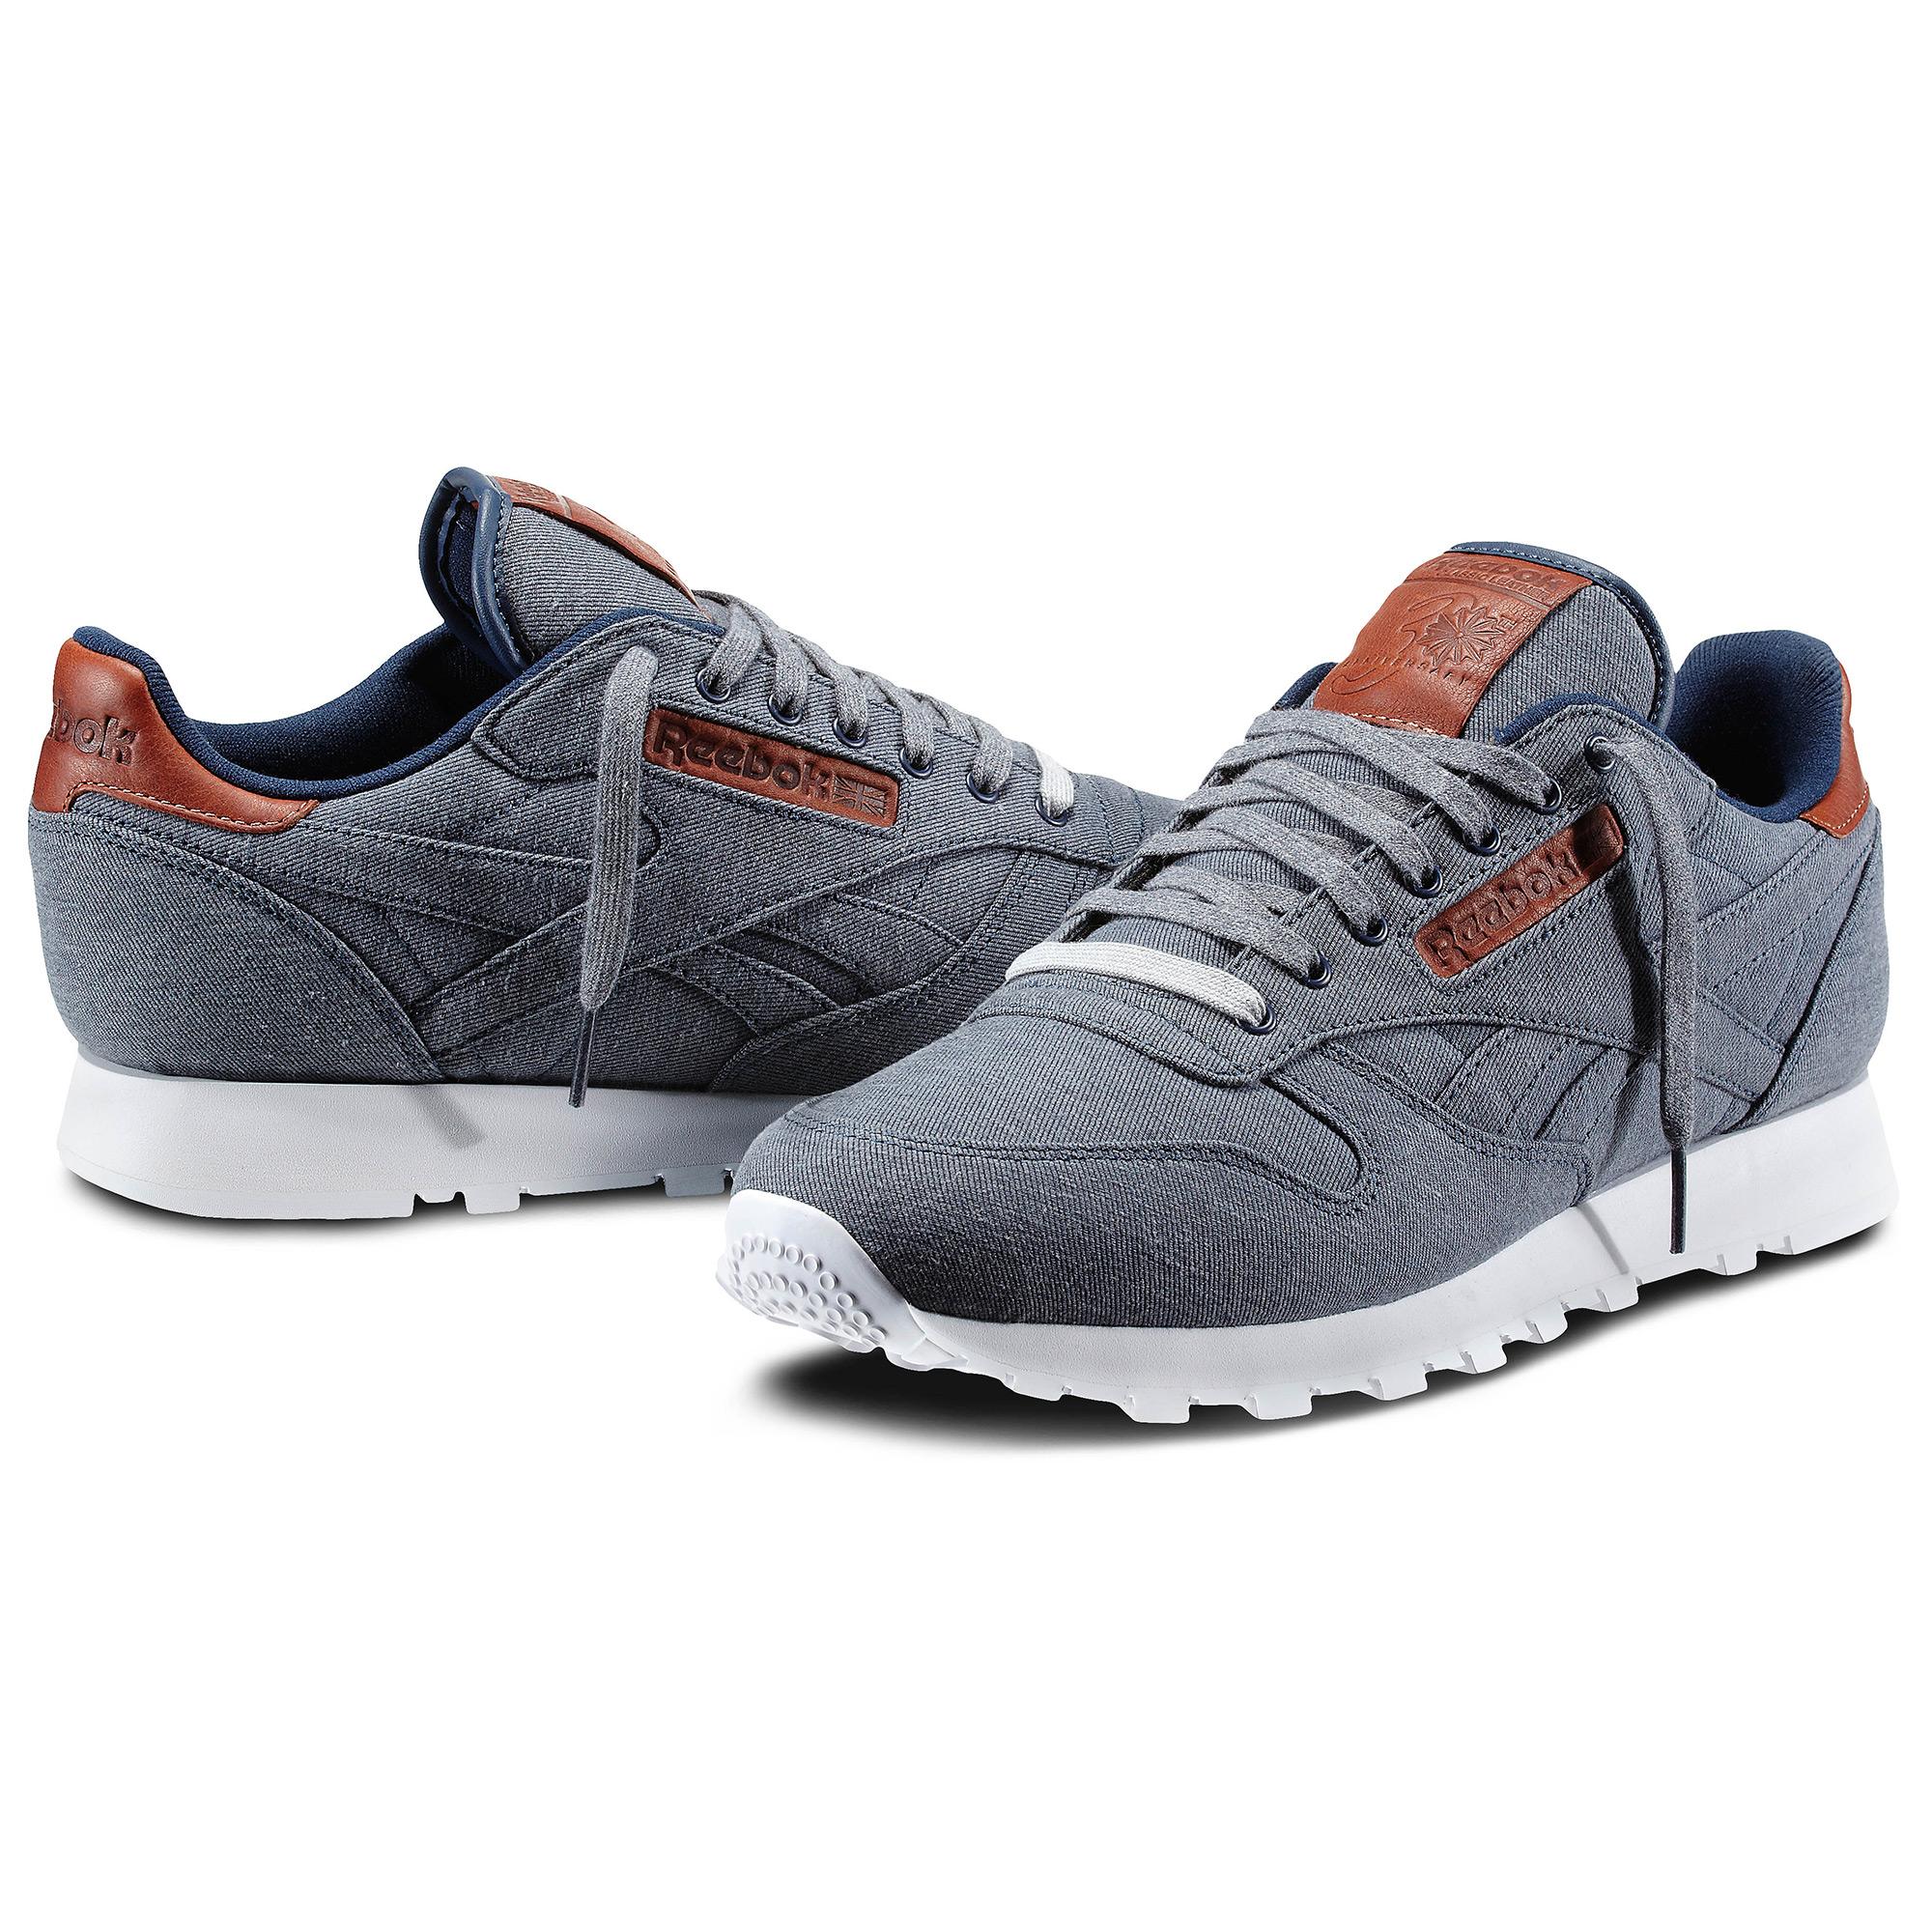 Foto Reebok Classic Leather Salvaged Hombre foto 649527